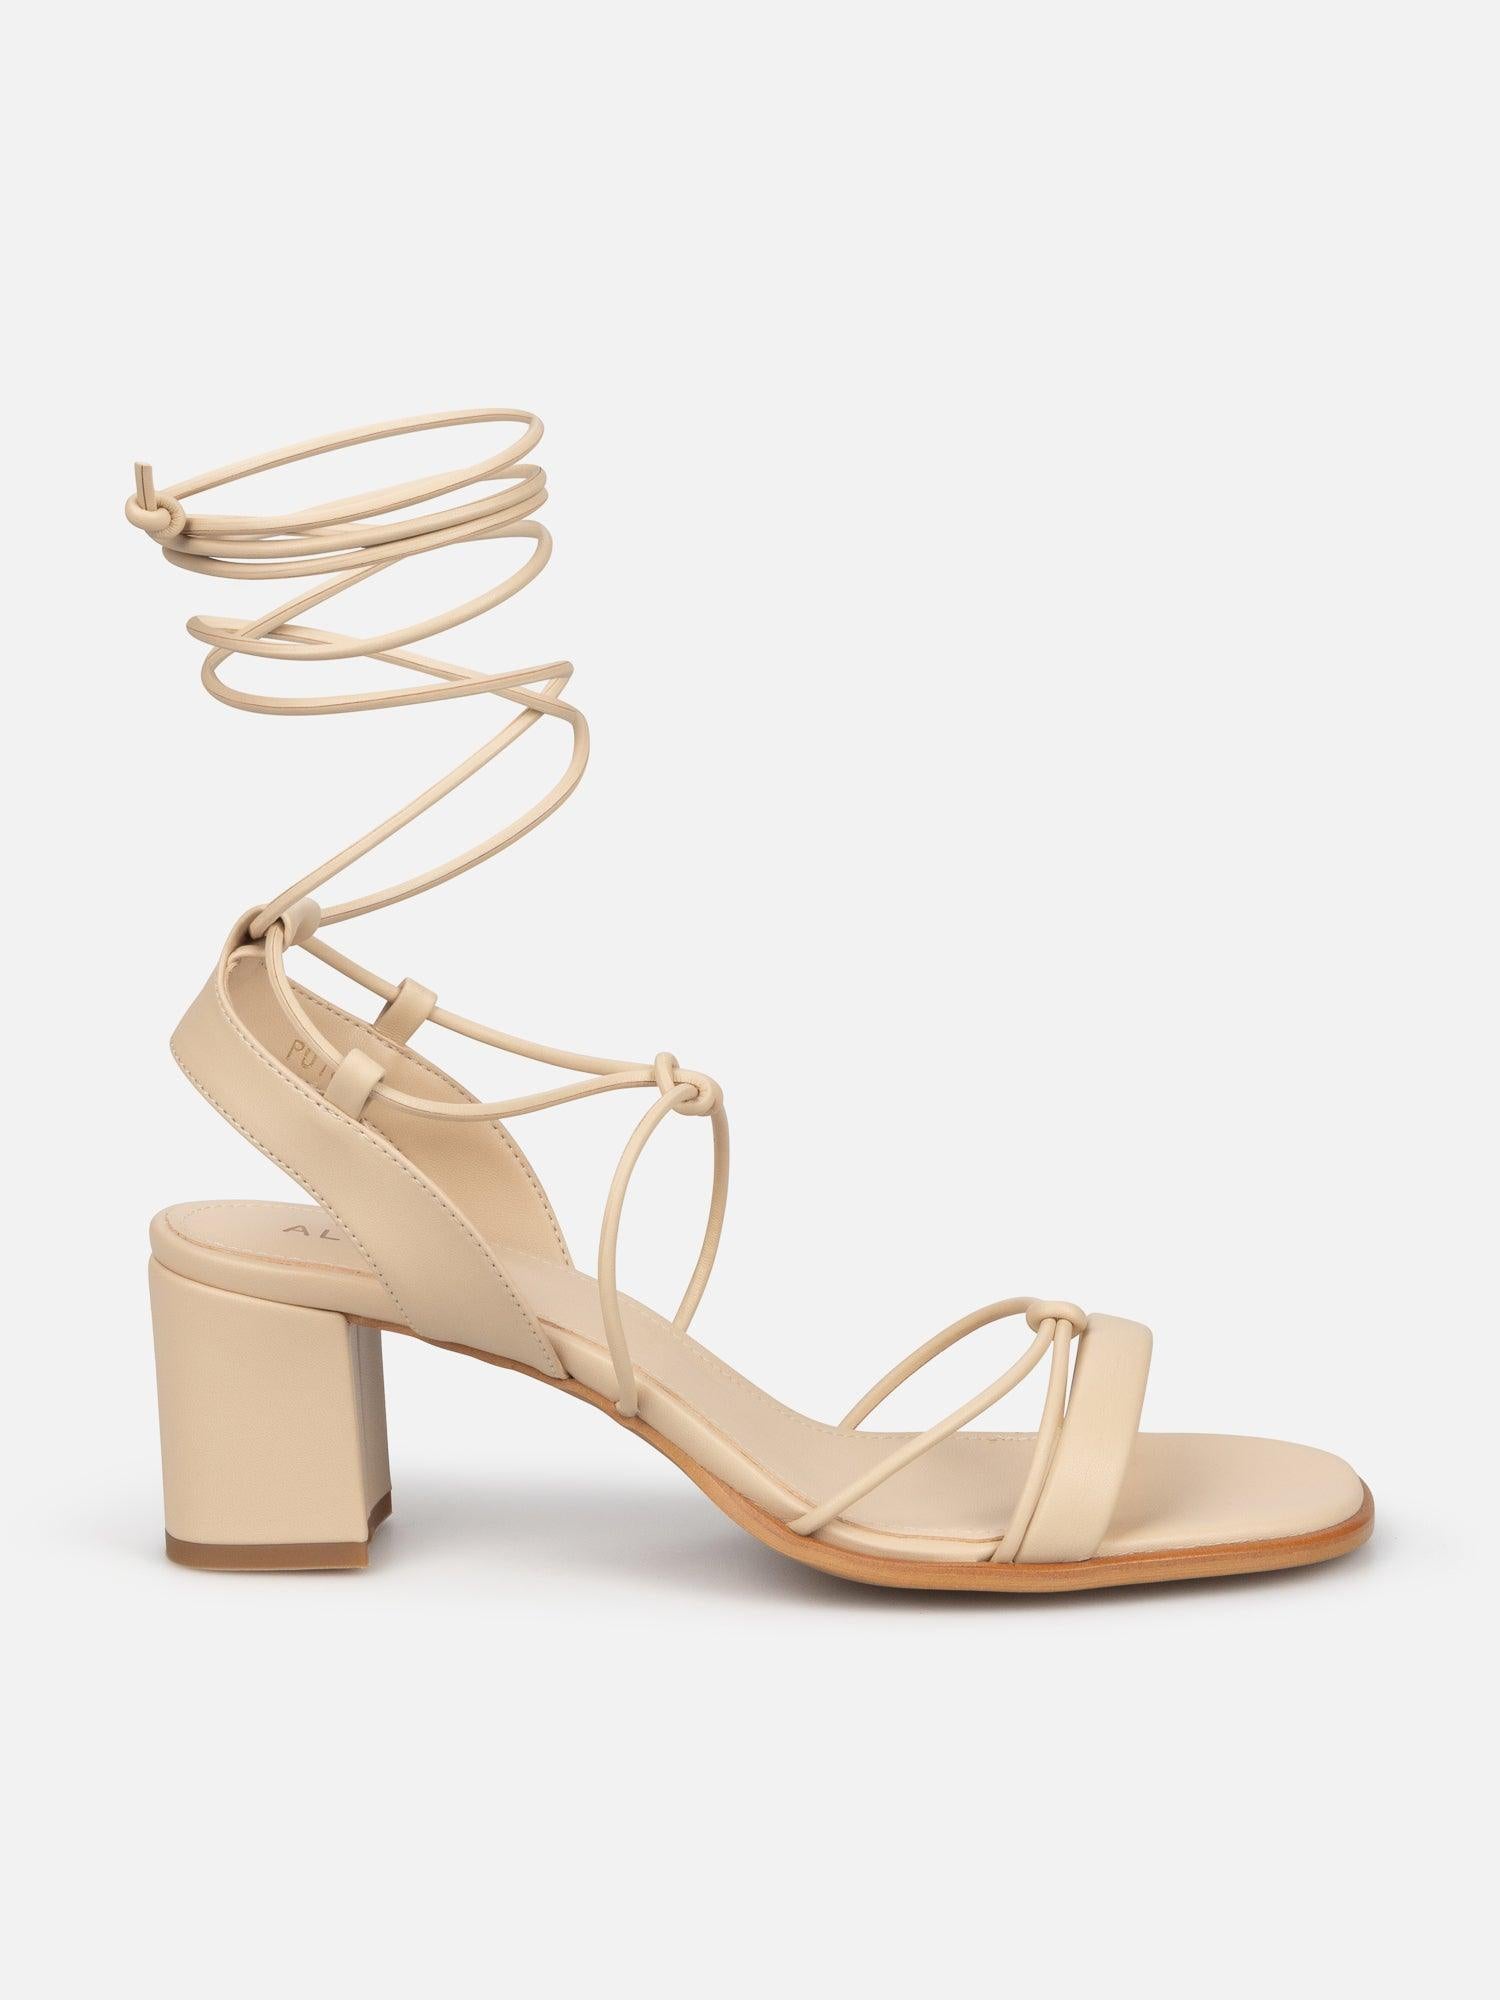 Alohas Sophie Corn Vegan Sand Strappy Sandals - Corn - Thought Clothing UK